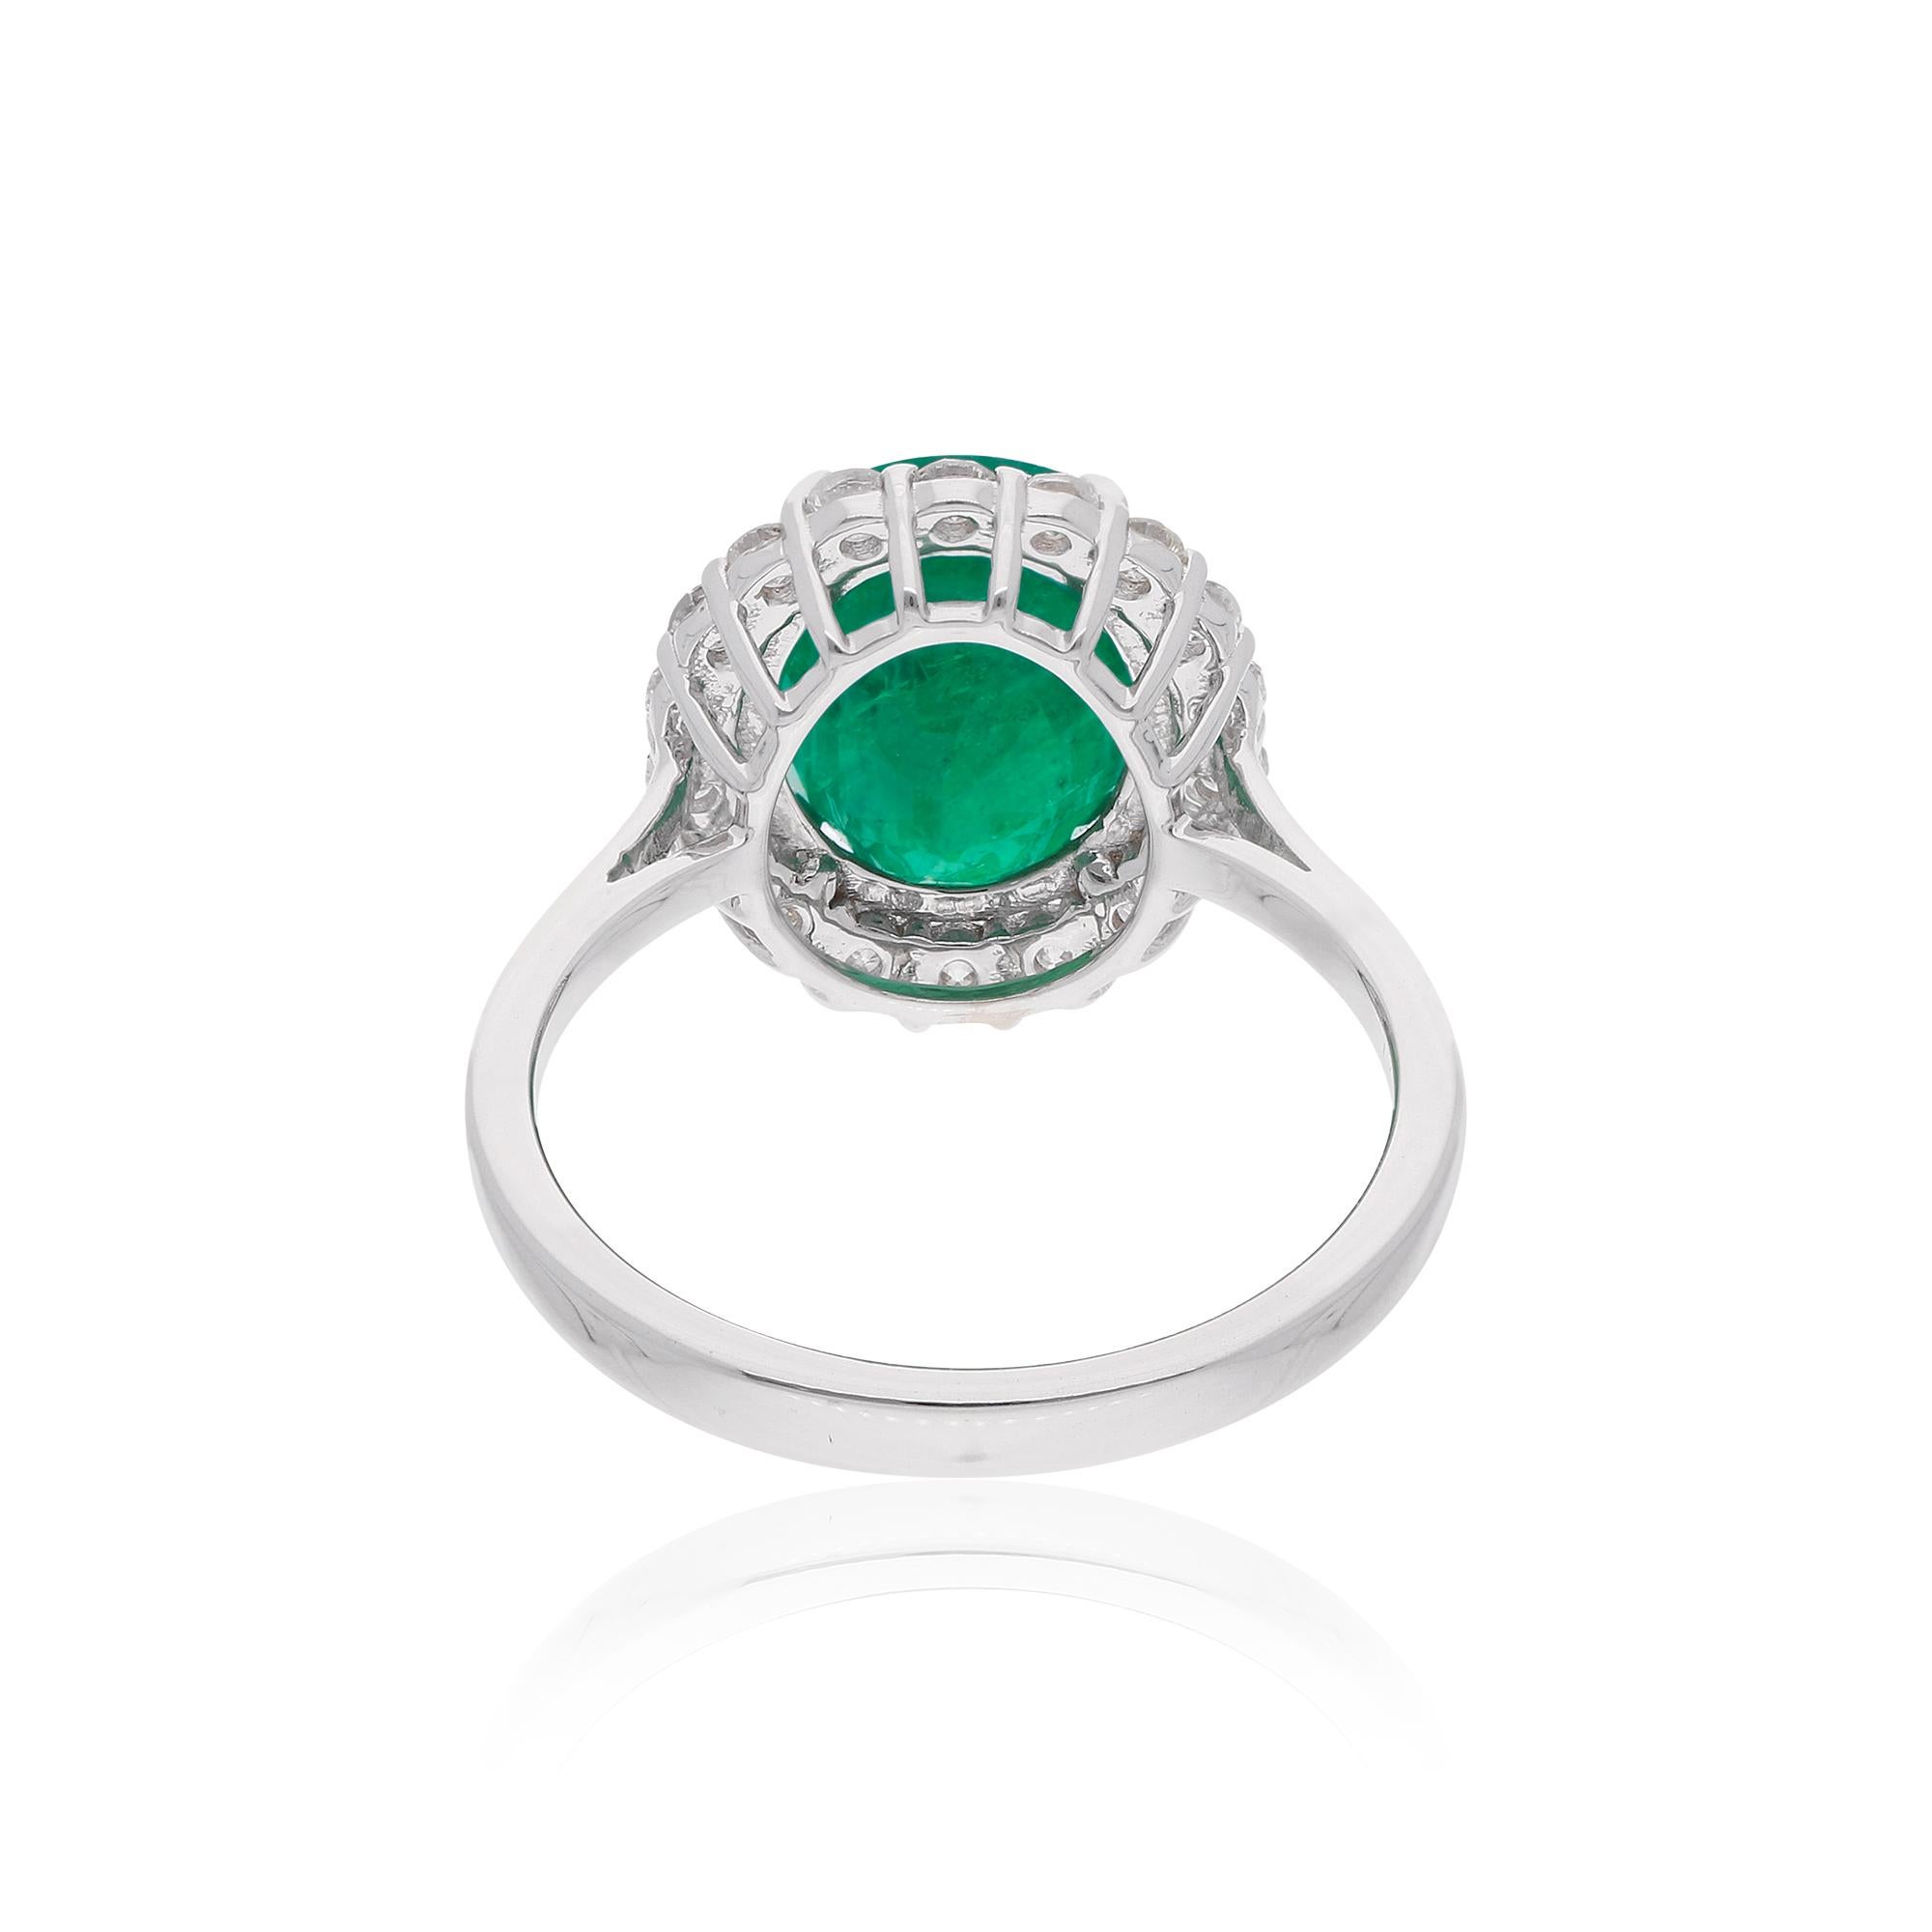 Modern Oval Natural Emerald Gemstone Cocktail Ring Diamond 14 Karat White Gold Jewelry For Sale